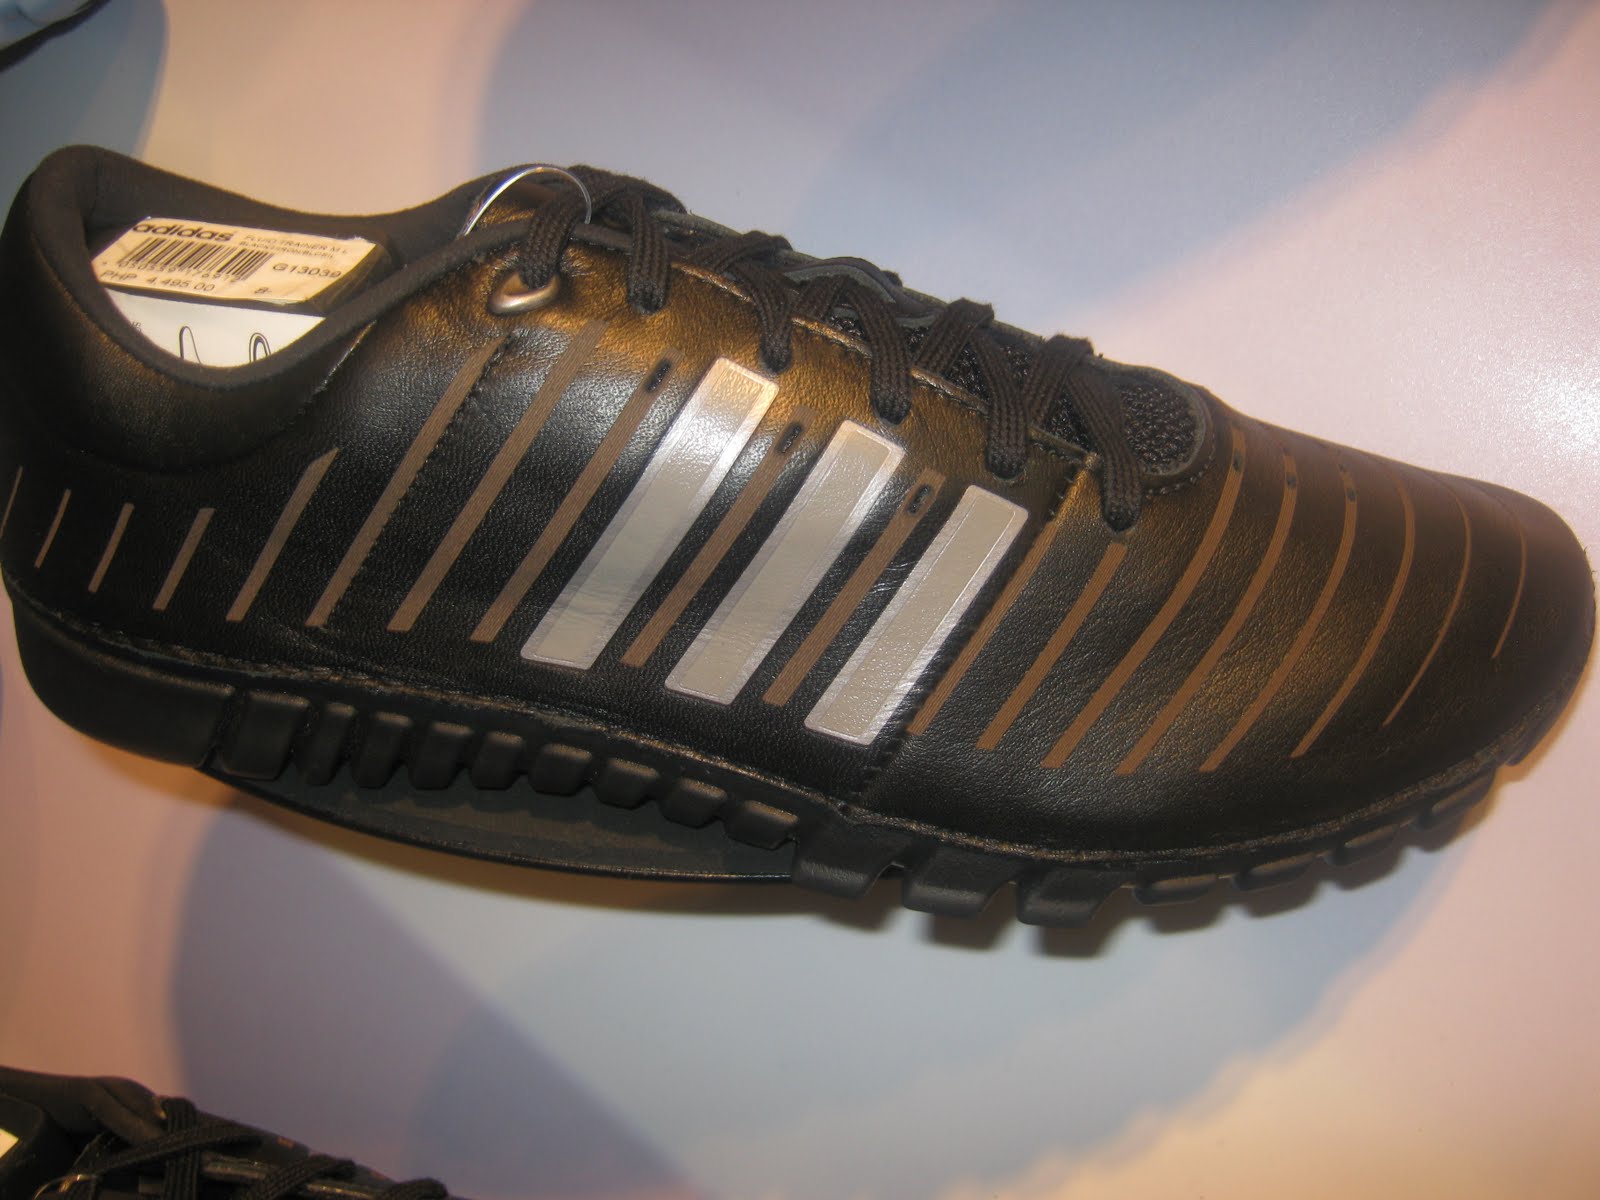 Canberra afeitado Embutido L.E.N.S.(Lifestyle, Events, News, and Society)blogs: Adidas Launches Fluid  Trainer